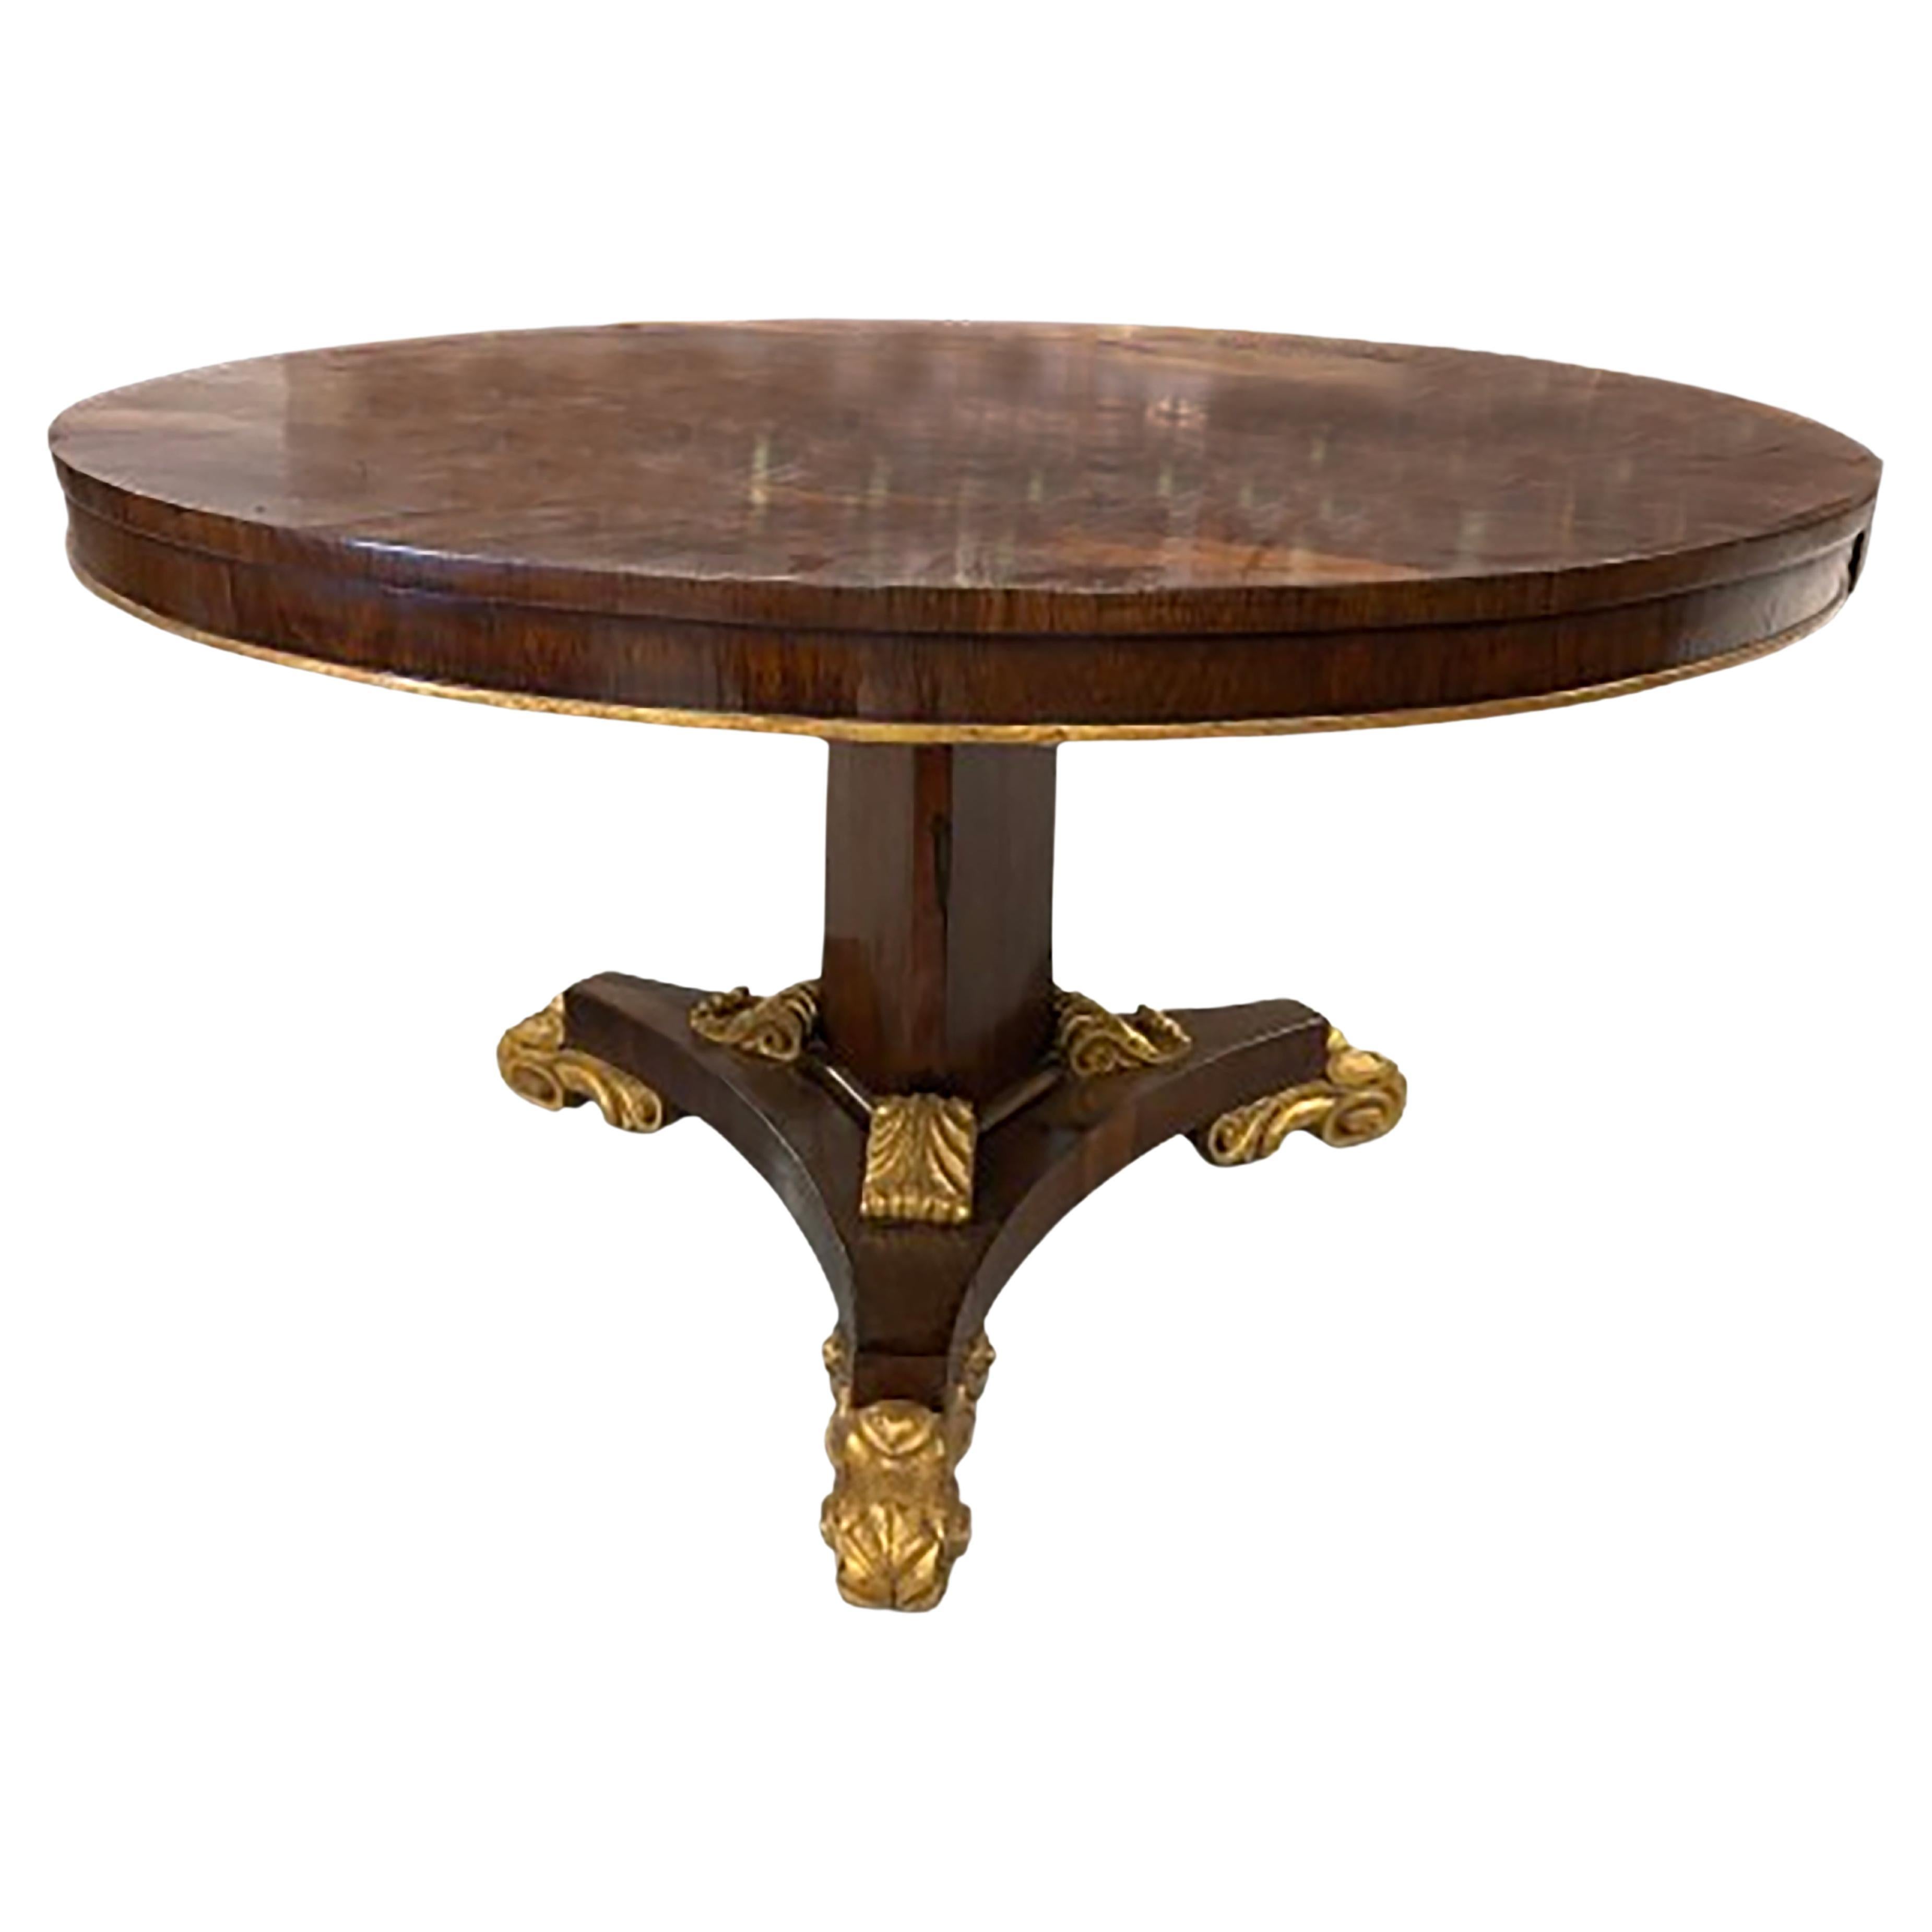 19th Century Inlaid and Parcel Gilt Rosewood Empire Center Table